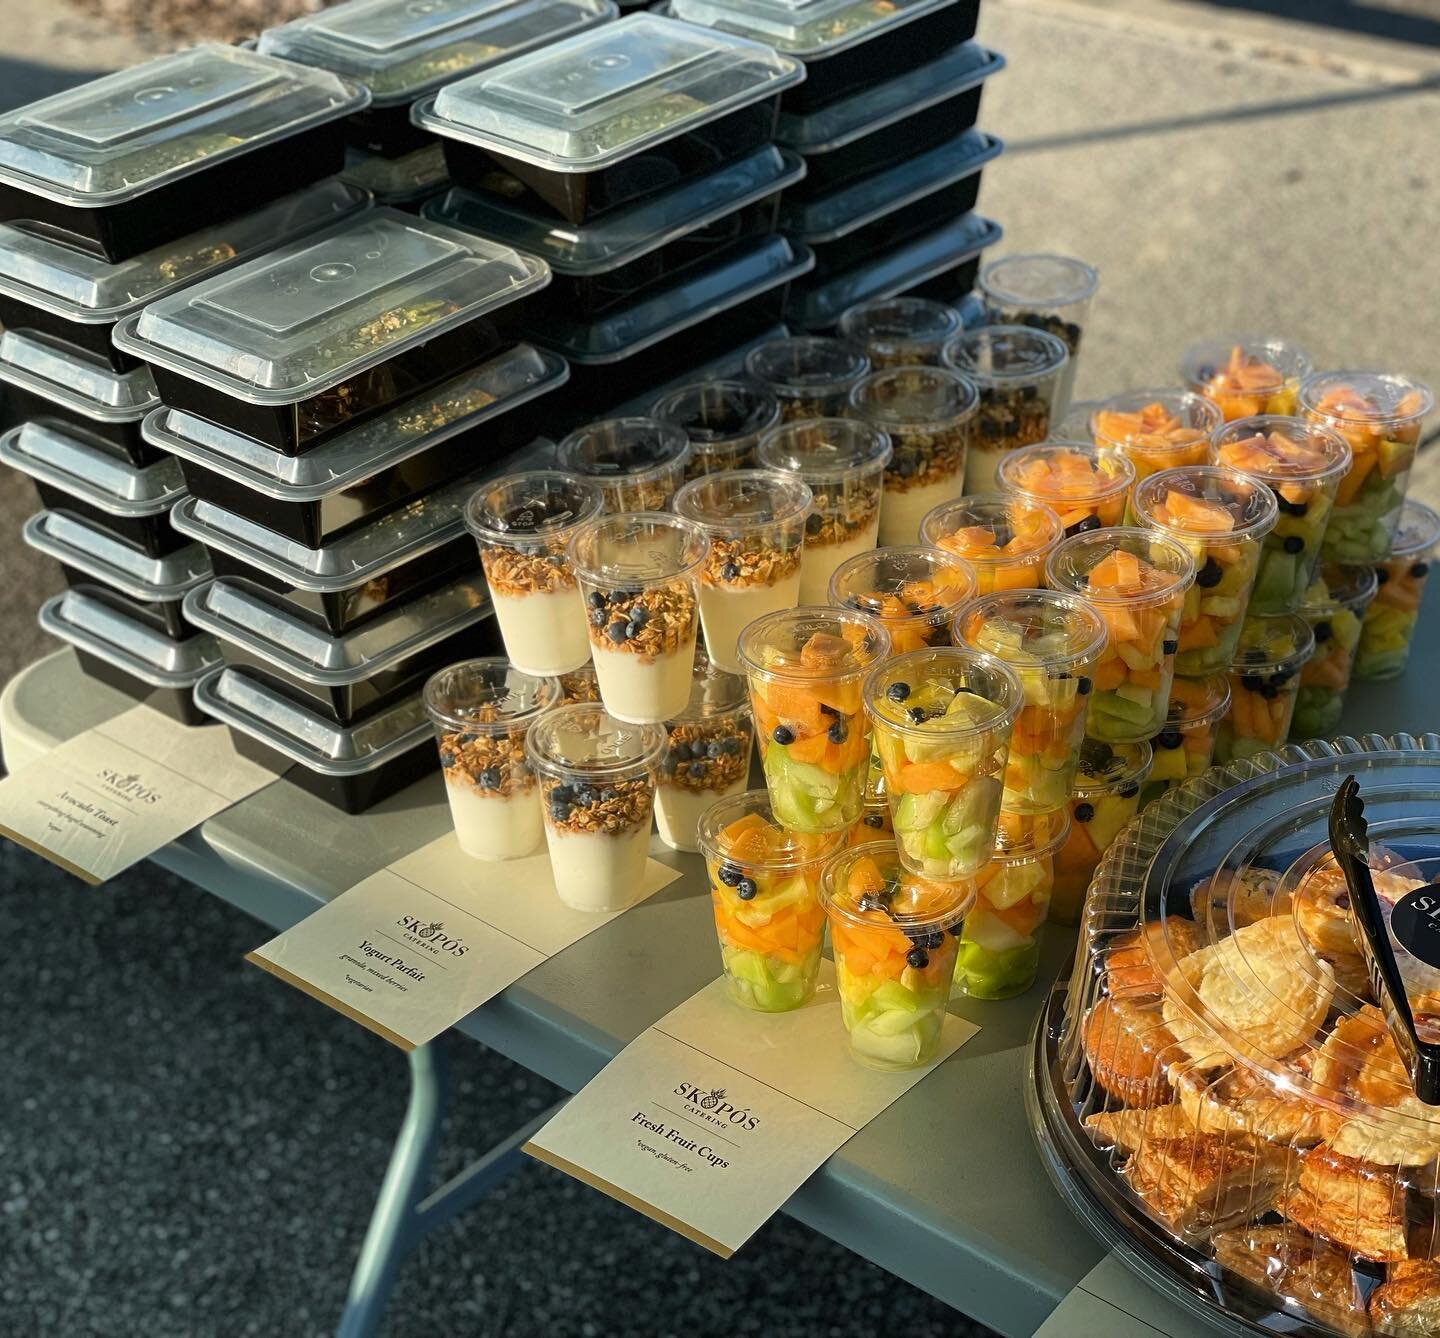 A &lsquo;Sunrise&rsquo; breakfast at Citi Field for an automotive client&rsquo;s national tour!
#SkoposCatering #Catering #Events #Breakfast #BoxedMeals #ProductionCatering #SocialEvents #Queens #CitiField #NJCatering #NYCCatering #AvocadoToast #Cont